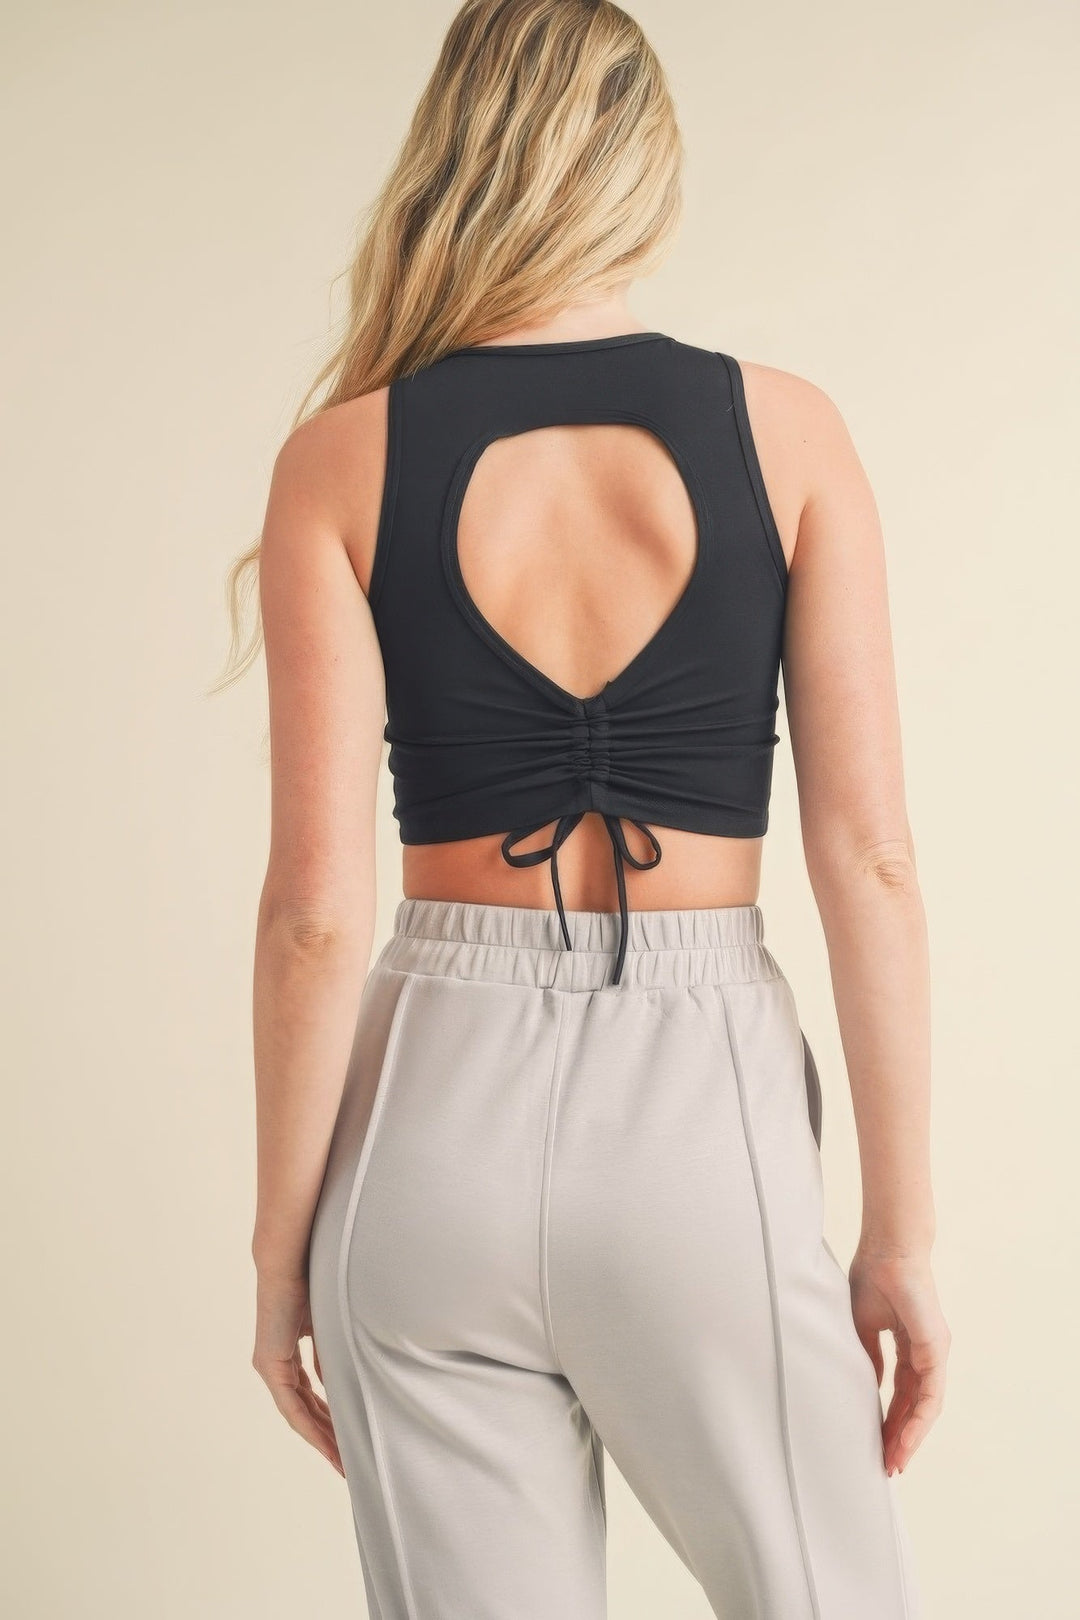 The802Gypsy  Activewear/tops M / black ❤GYPSY LOVE-Cropped Acrivewear Tank Top